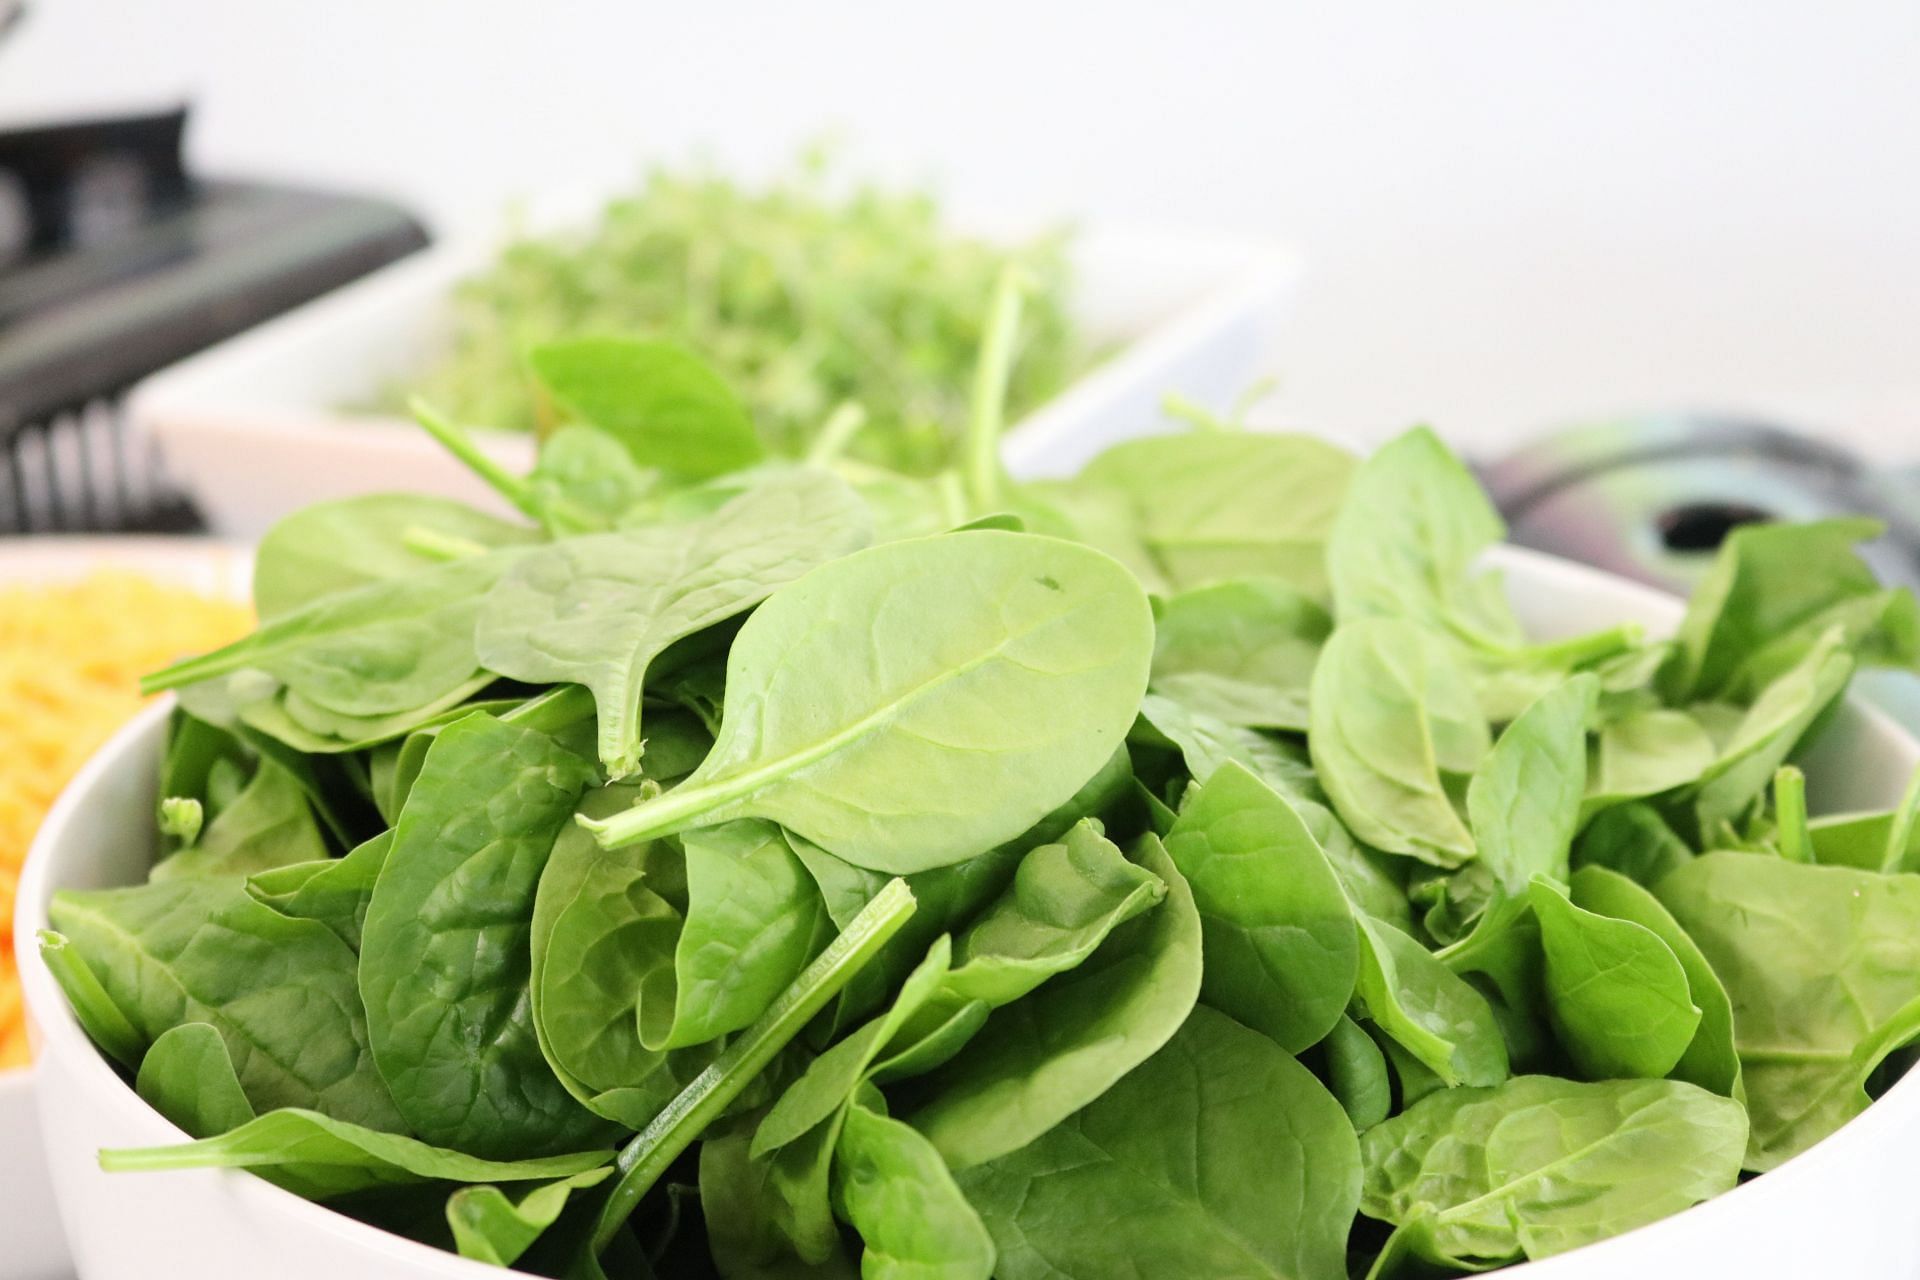 Leafy greens are one of the best low calorie fillings foods. (Image via Pexels/Jacqueline Howell)